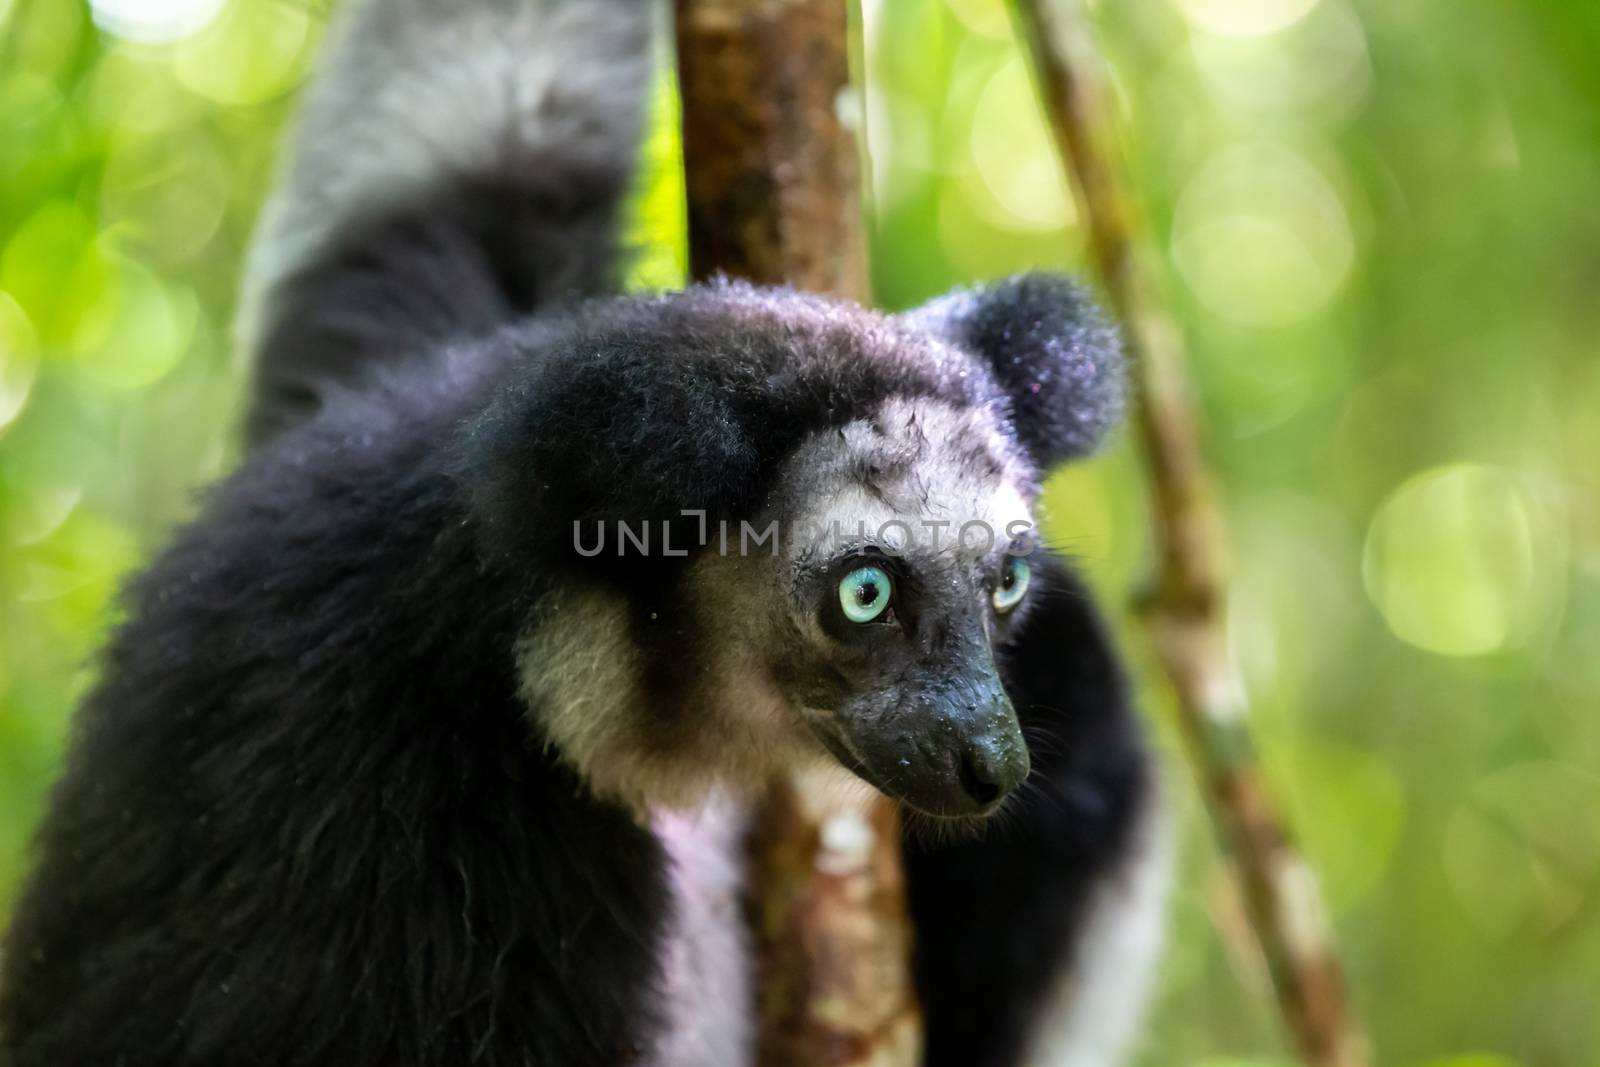 An Indri lemur on the tree watches the visitors to the park by 25ehaag6